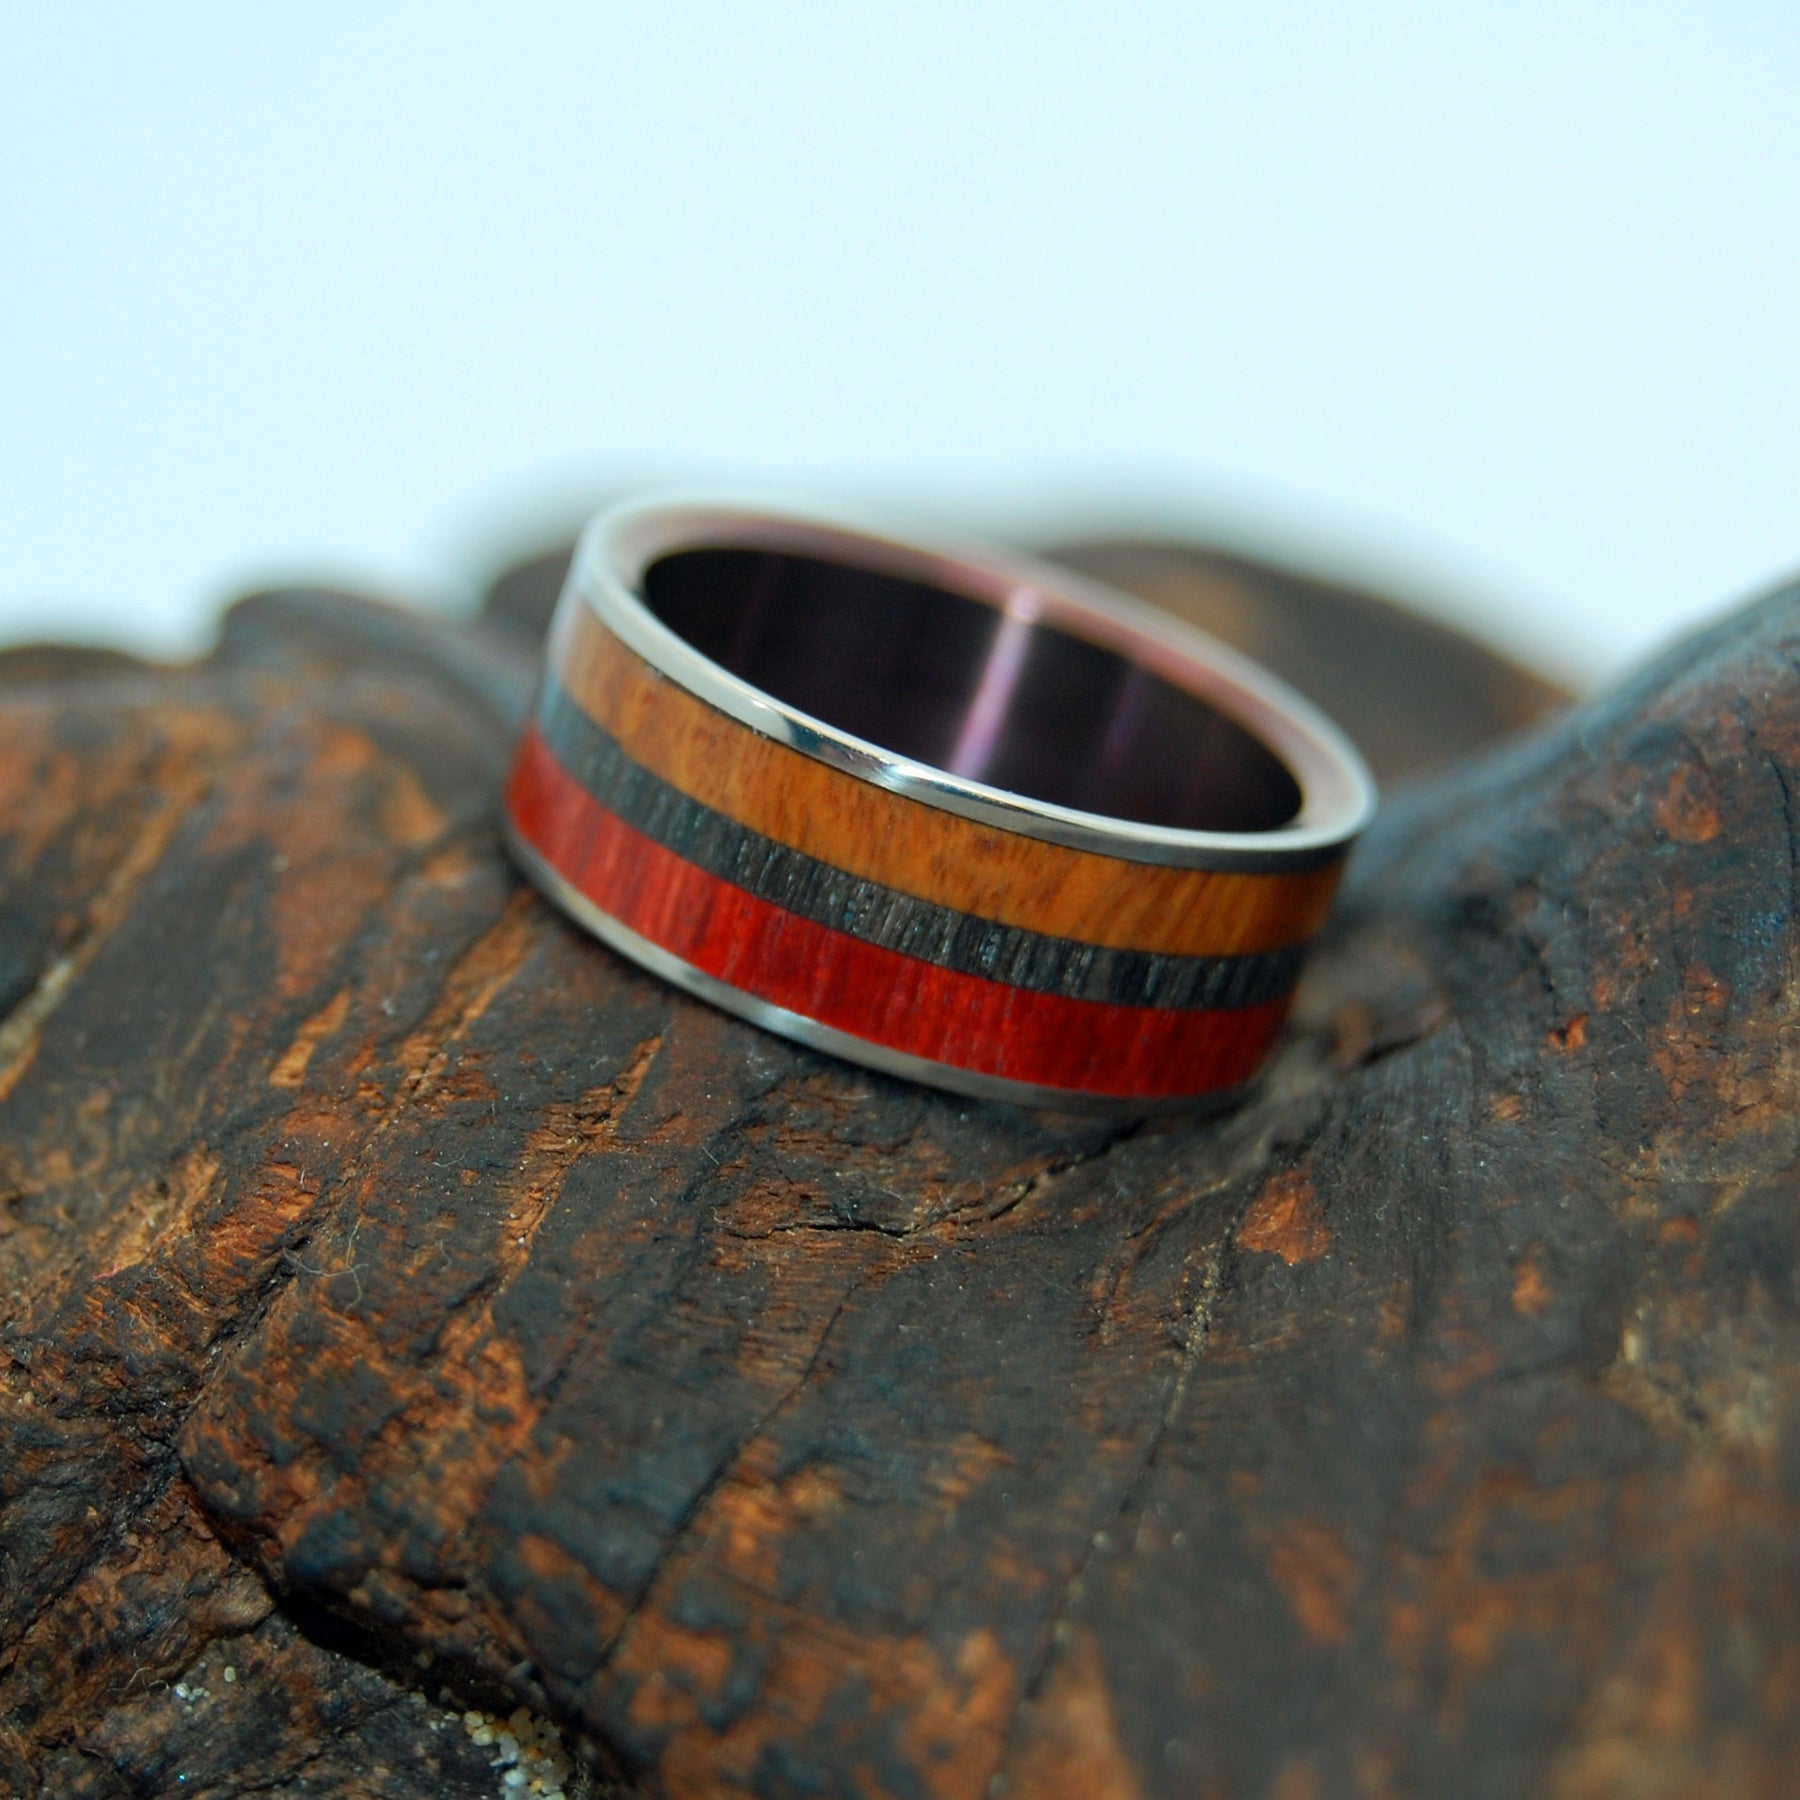 OLD SOUL | Ancient Woods & Titanium Handmade Wedding Rings - Minter and Richter Designs